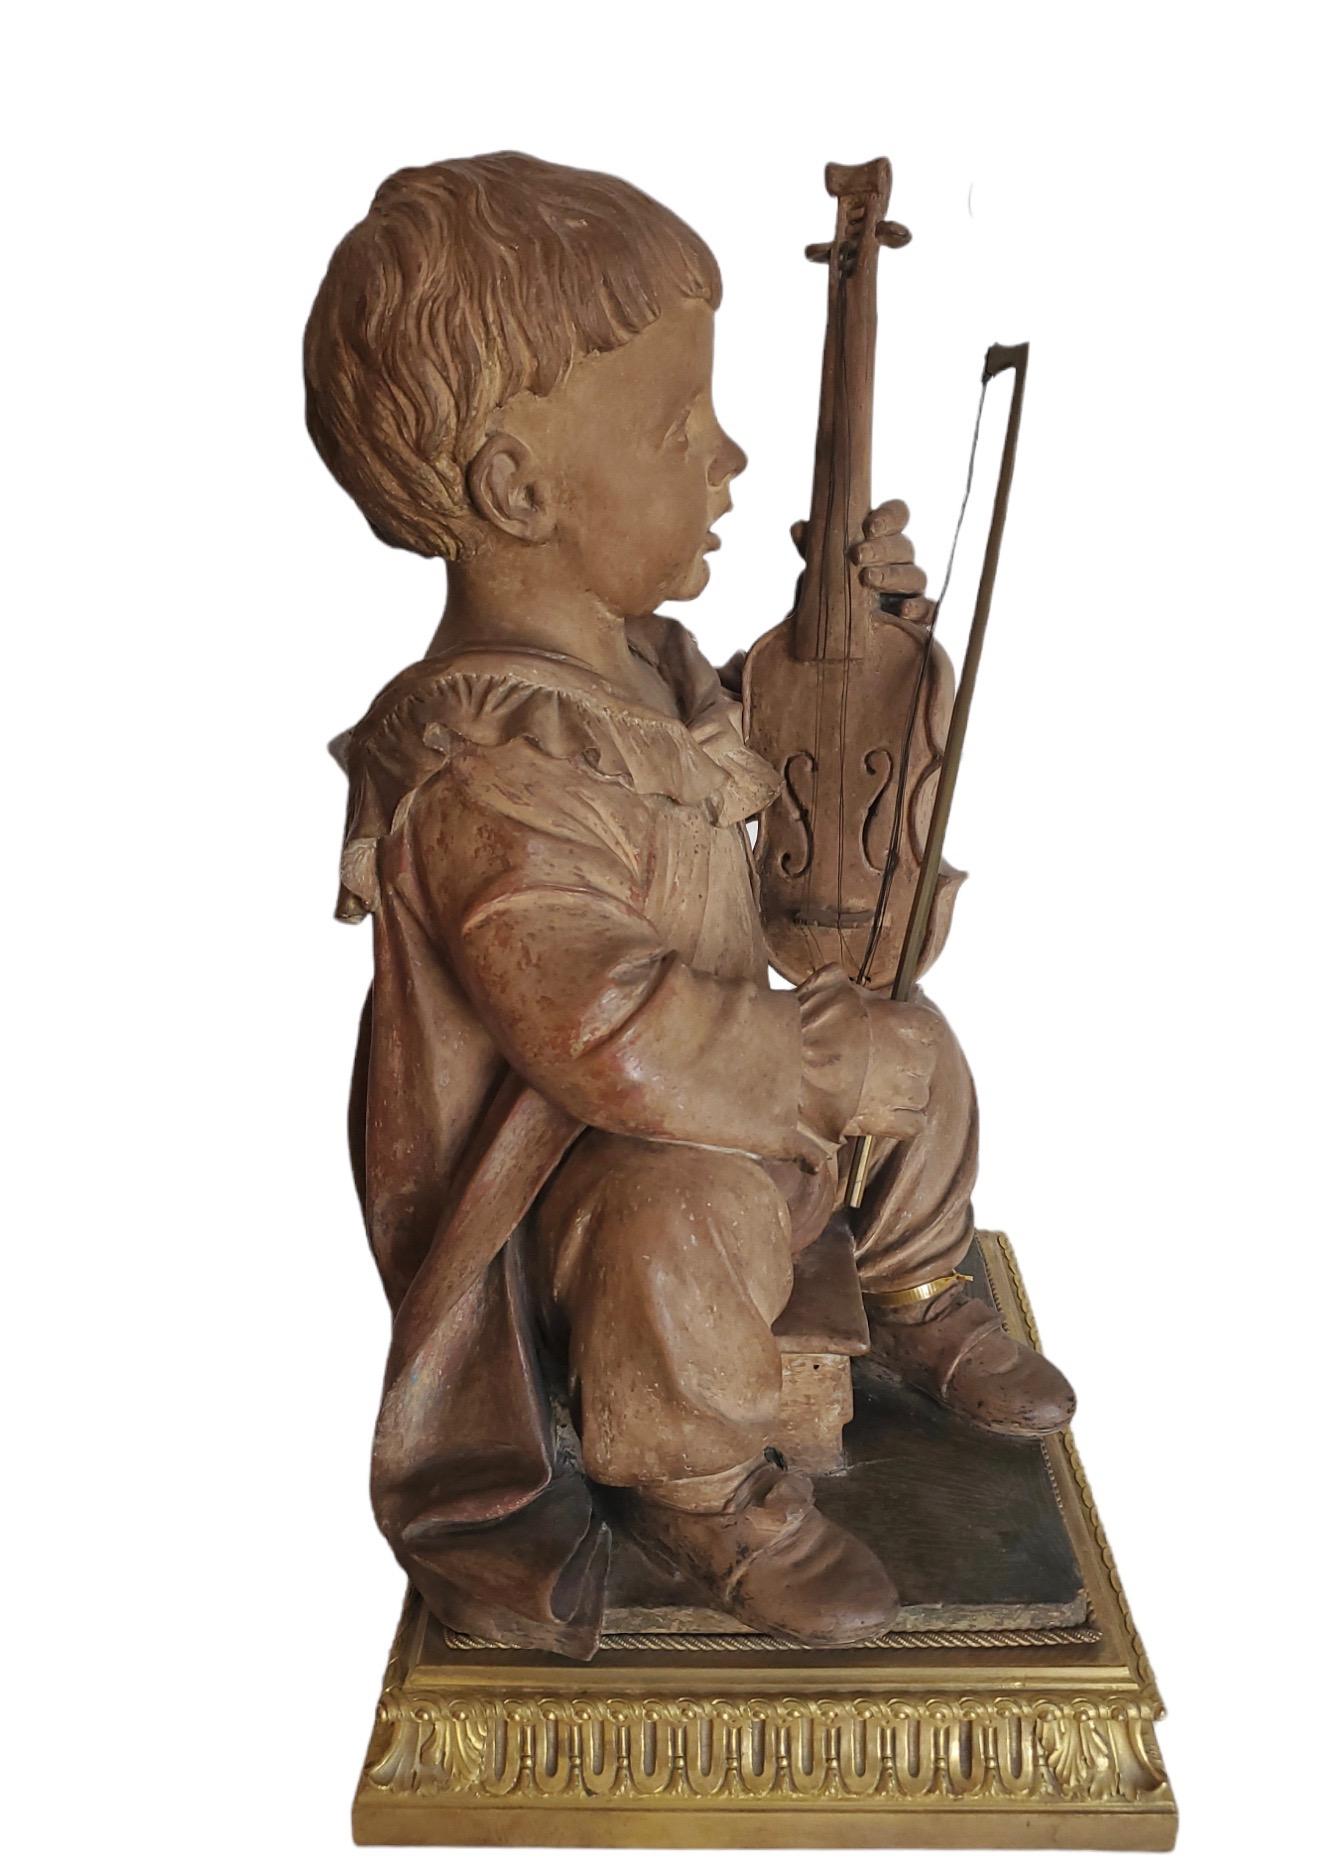 Finely-sculpted terracott figure of boy playing violin. Sit on a separate French dore bronze finely-cast base.